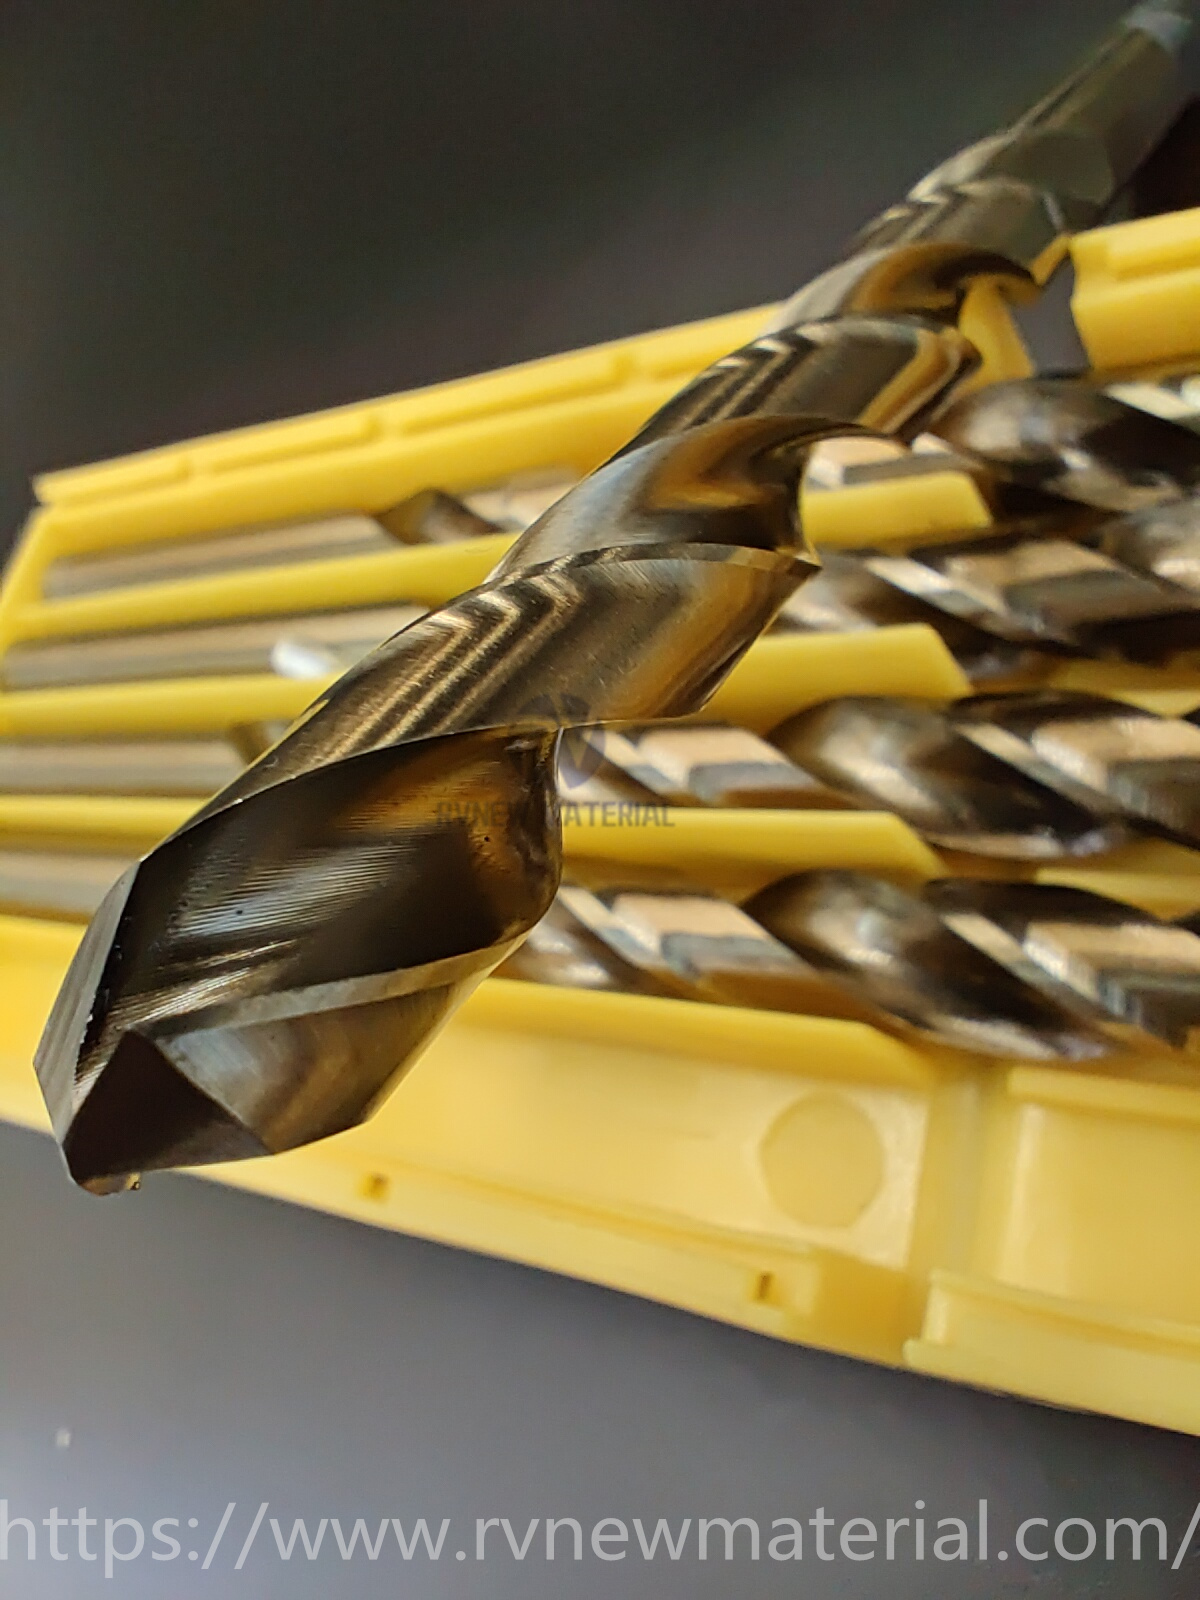 10mm M35 Co5 Stable Performance HSS Twist Drill Bit for Drilling Galvanized Pipe